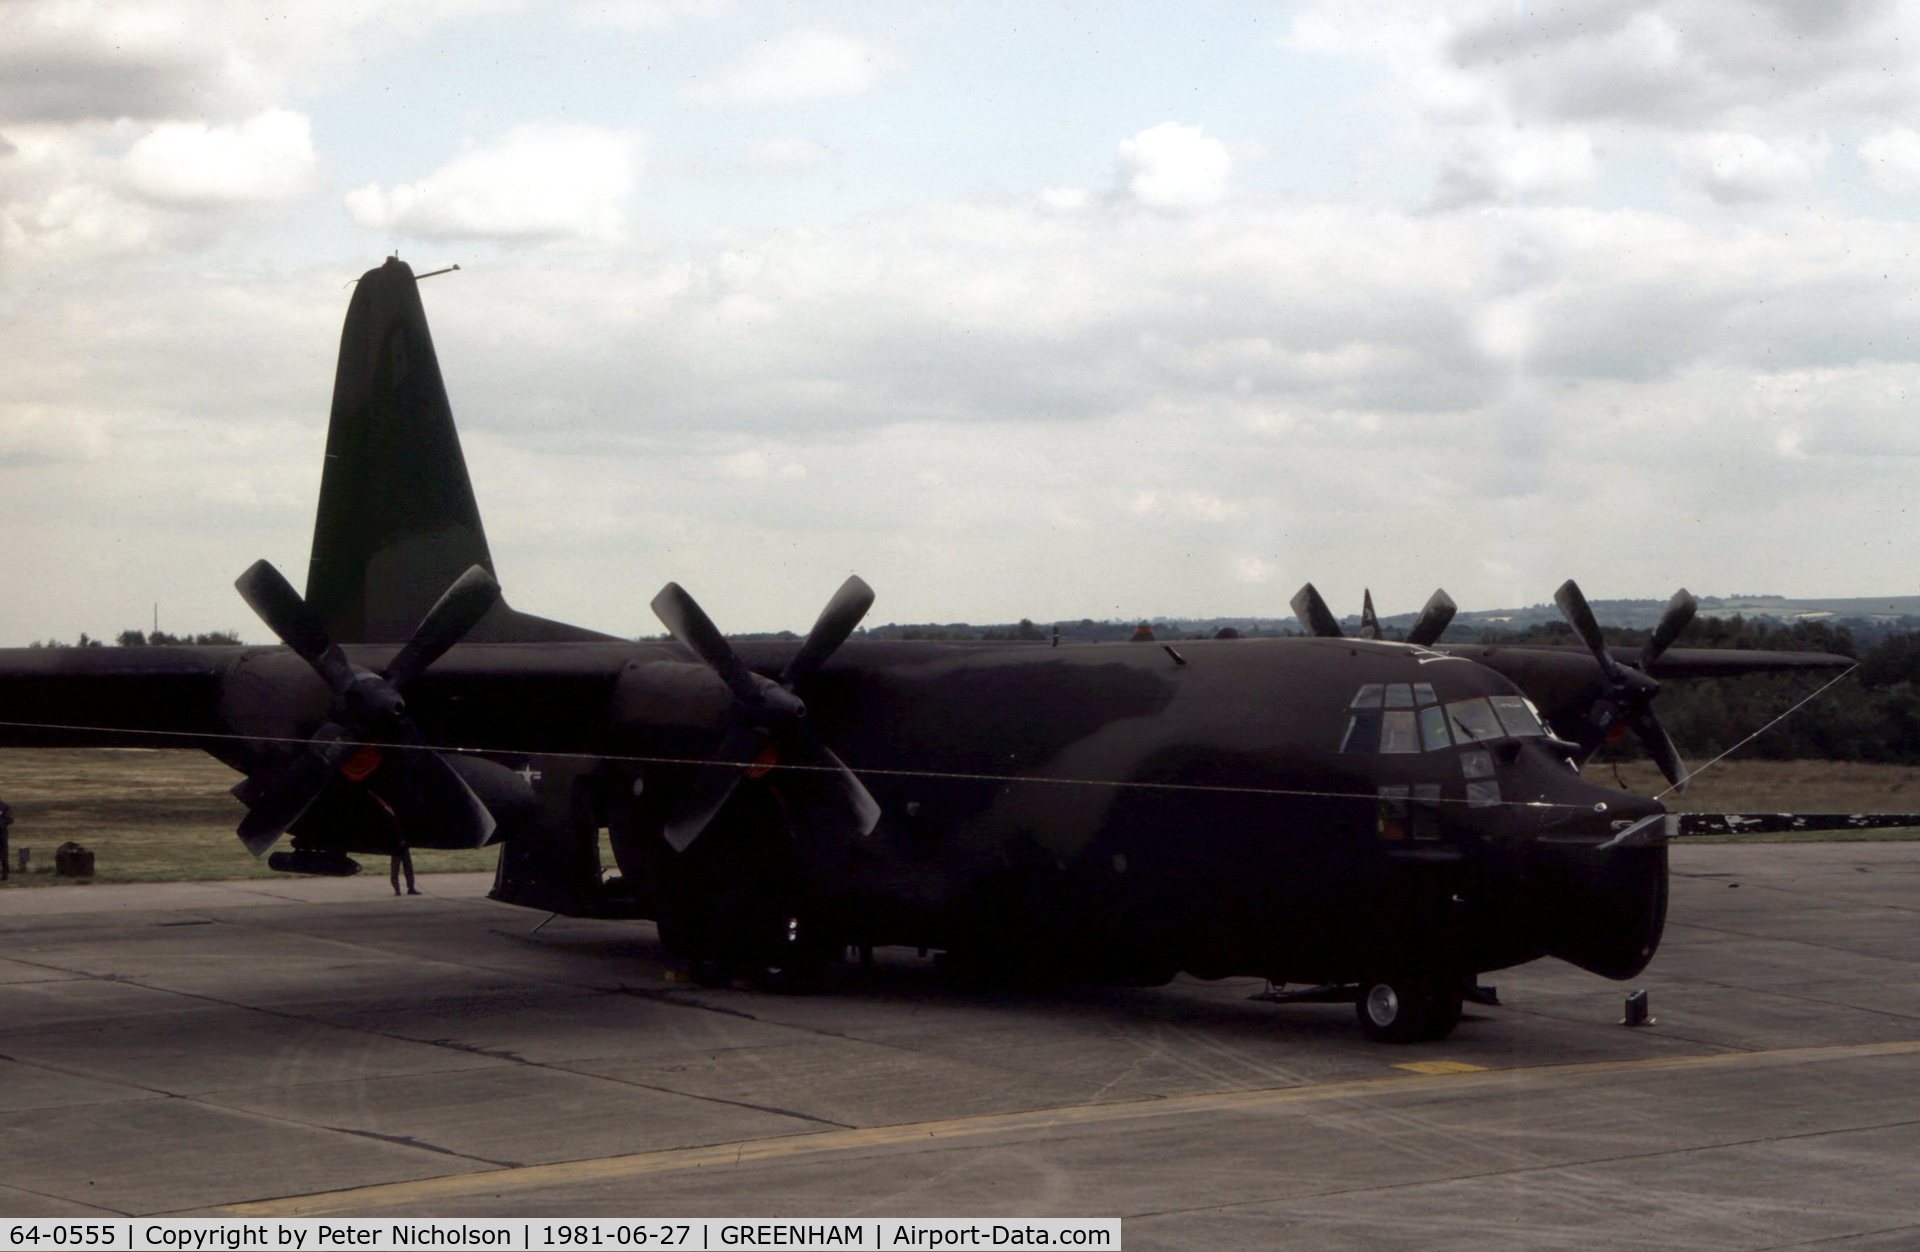 64-0555, 1964 Lockheed MC-130E Hercules C/N 382-4056, Another view of the 7th Special Operations Squadron Hercules on display at the 1981 Intnl Air Tattoo at RAF Greenham Common.